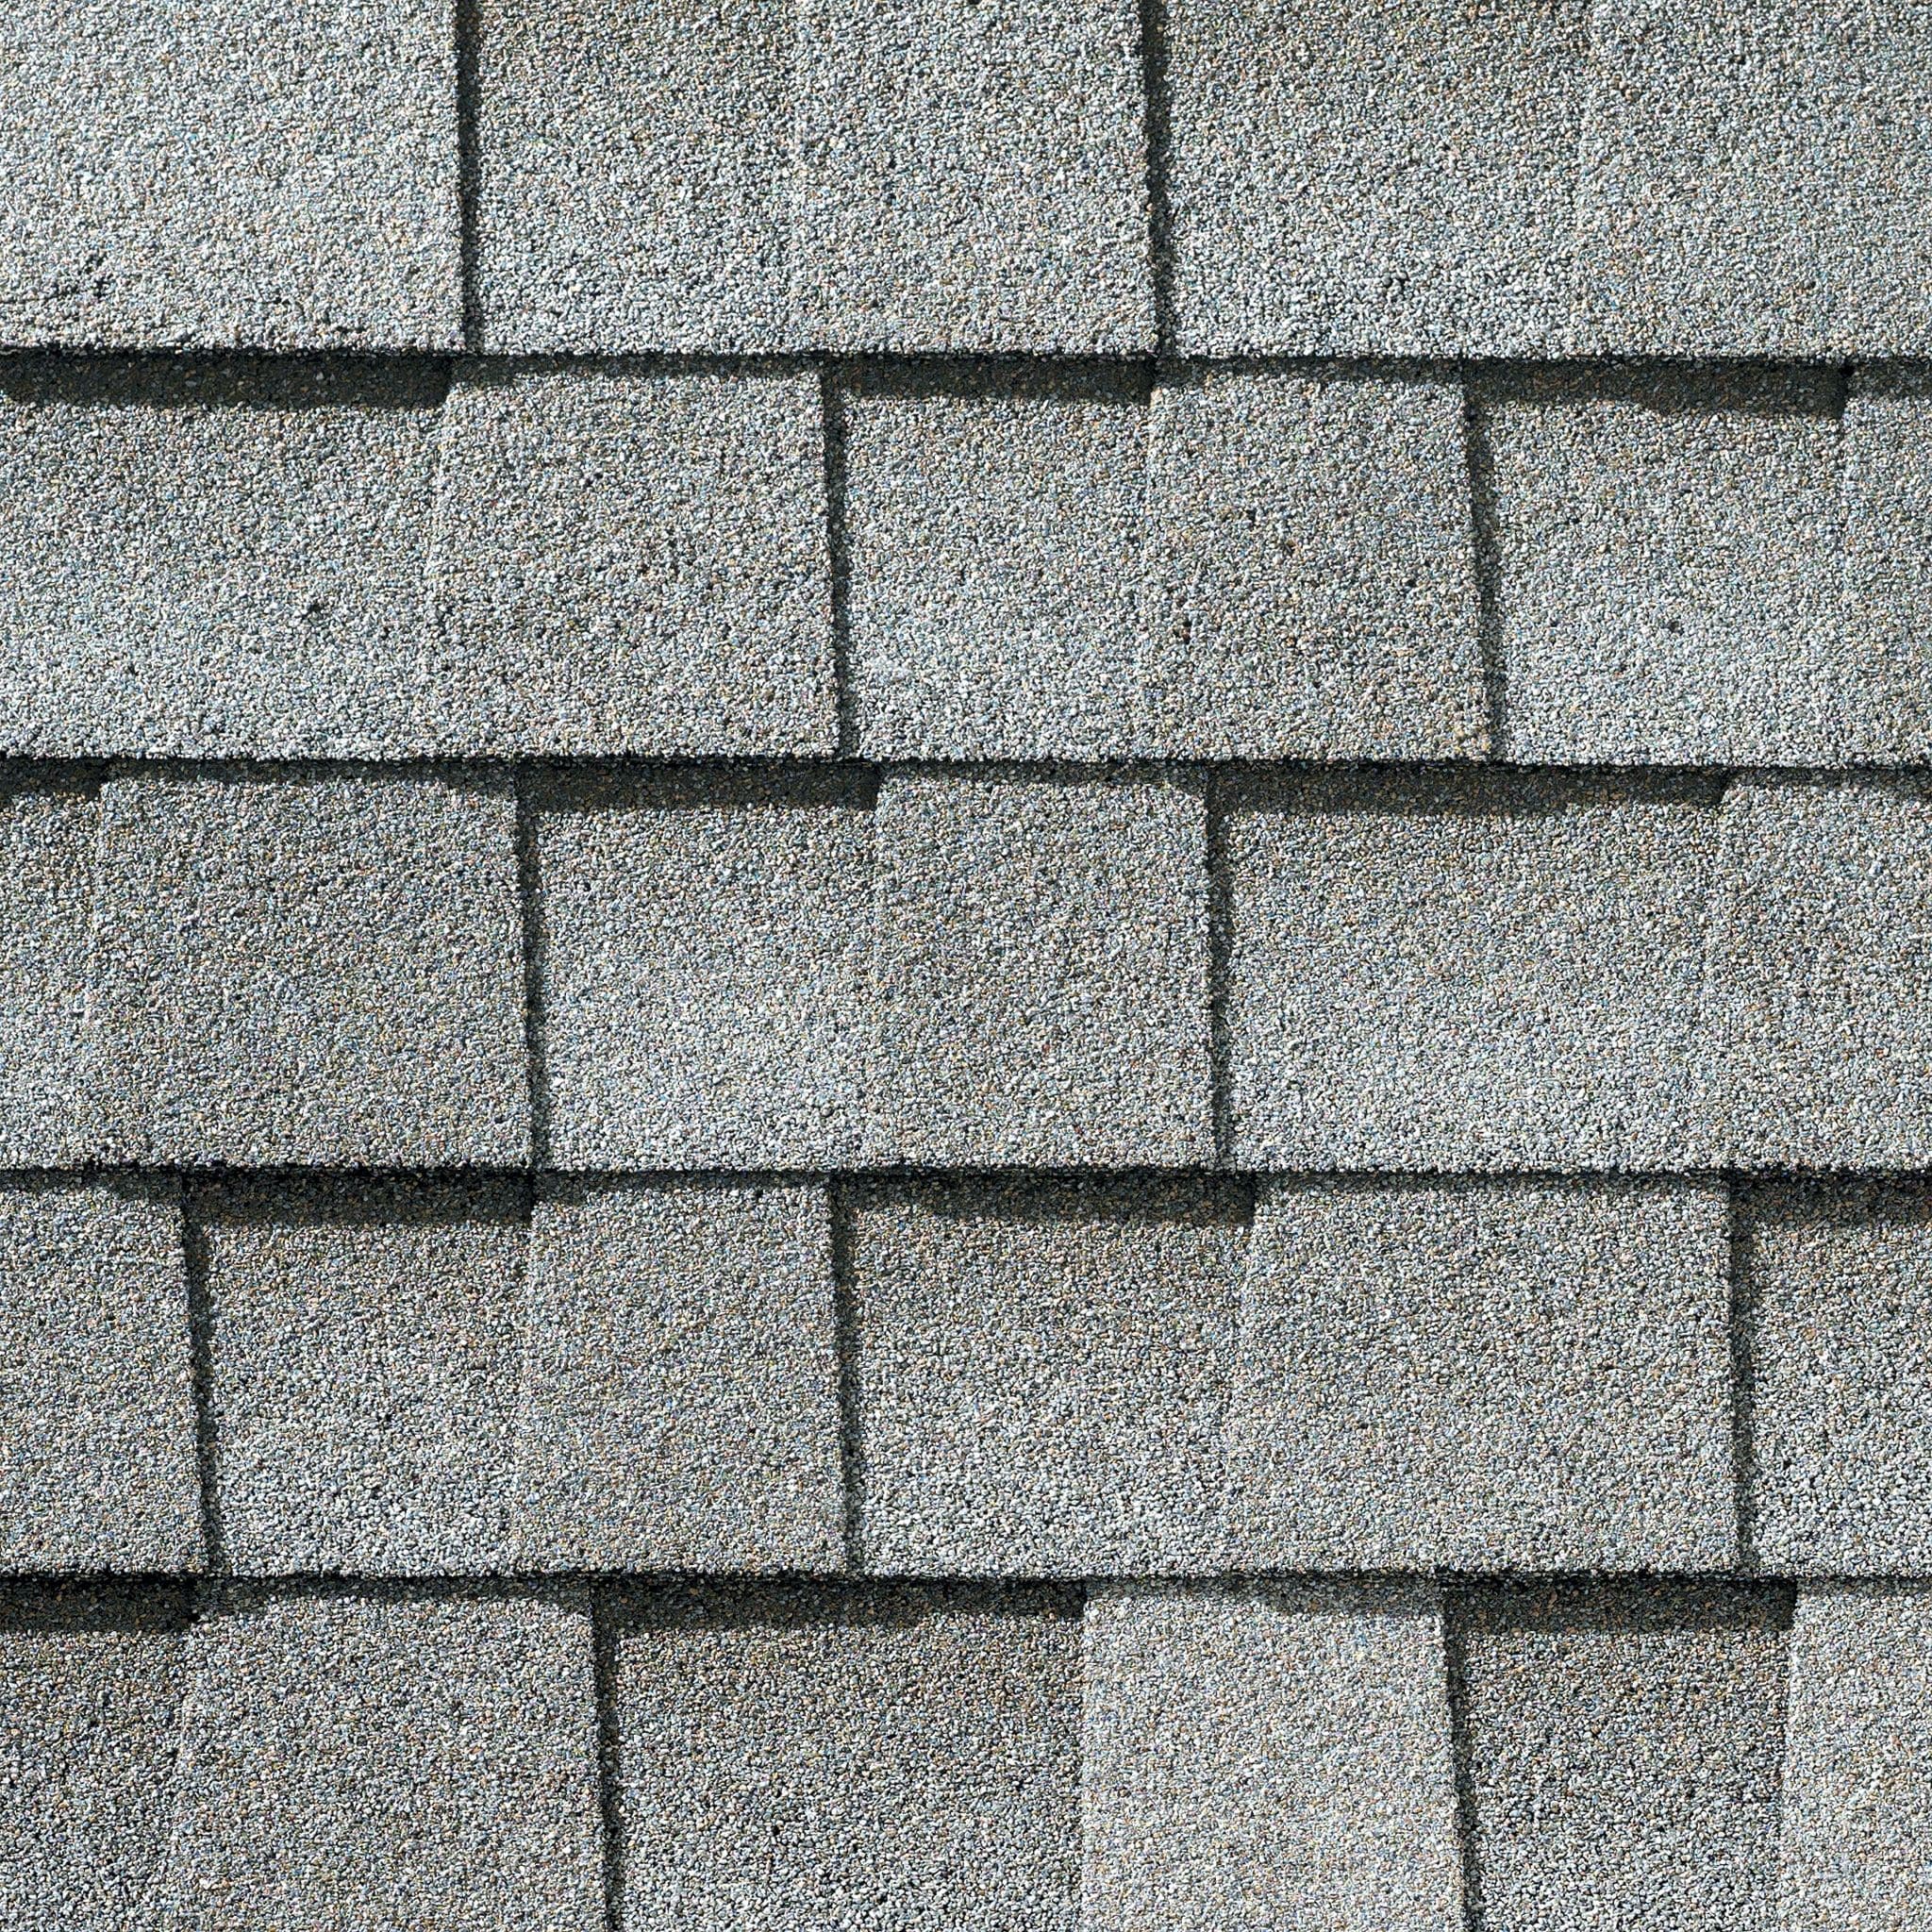 Timberline Hdz Fox Hollow Laminated Architectural Roof Shingles (33.33-sq ft per Bundle) in Gray | - GAF 0476330